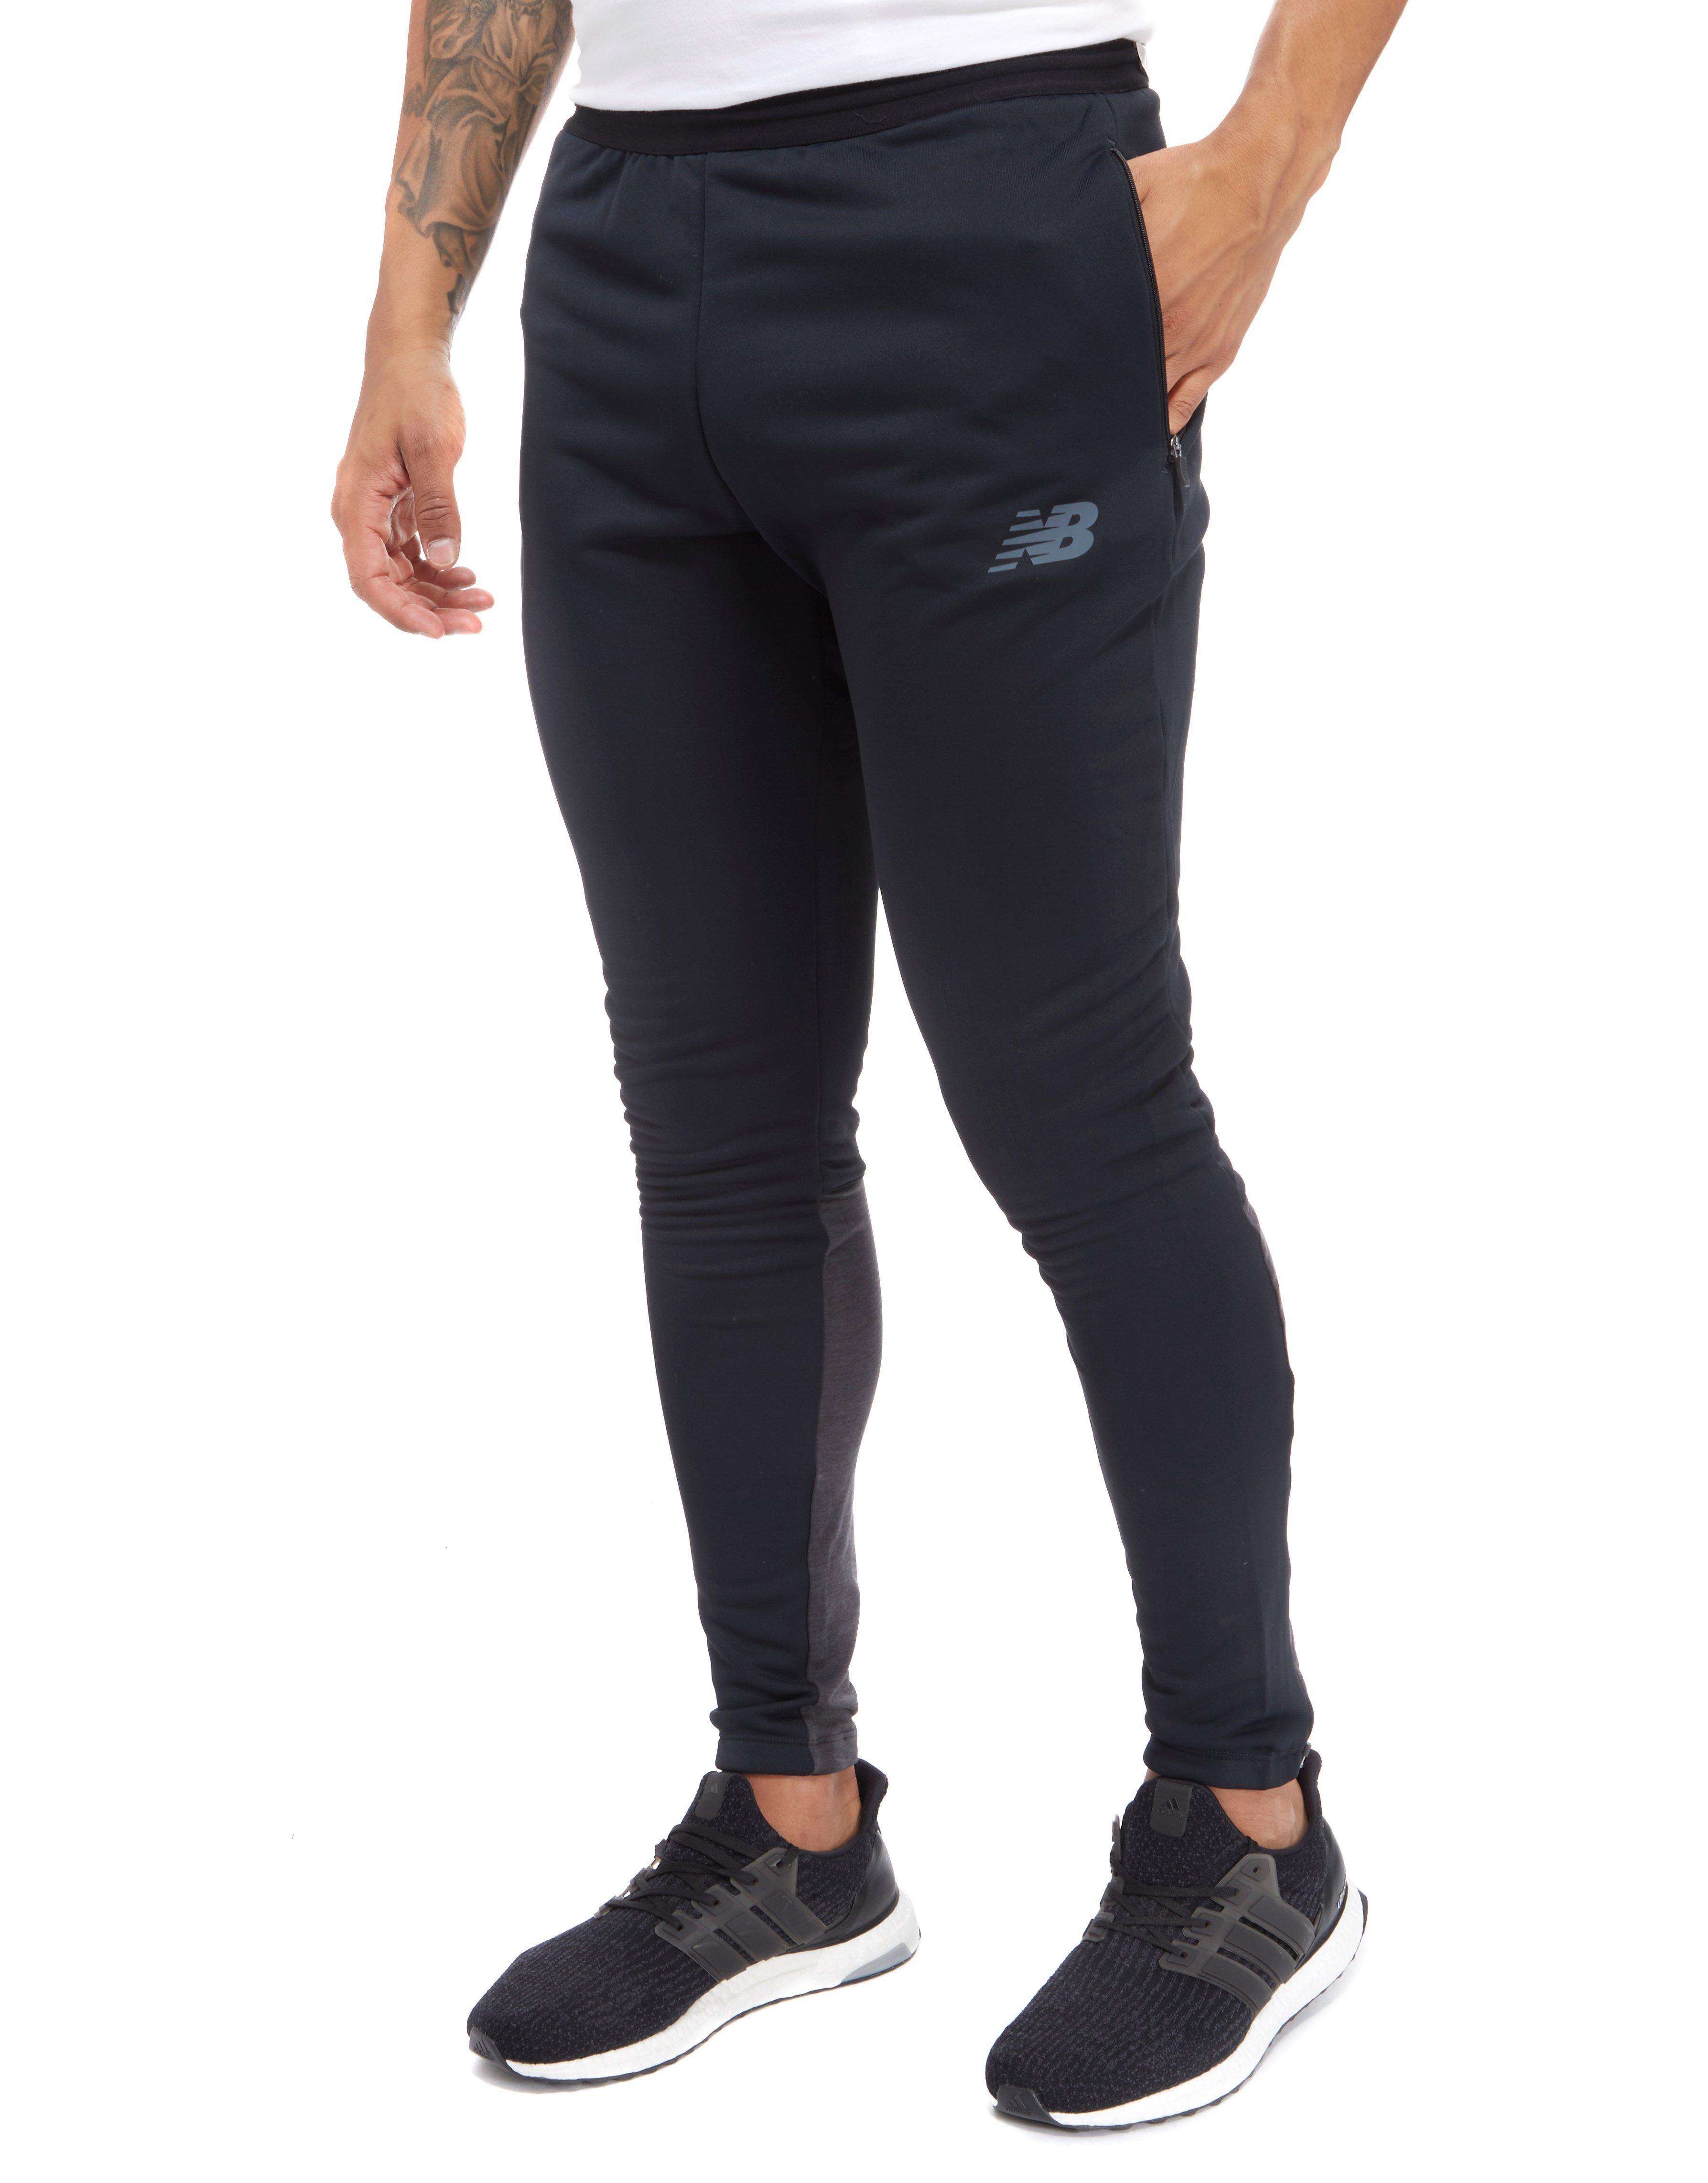 New Balance Synthetic Celtic Fc Training Pants in Black for Men - Lyst